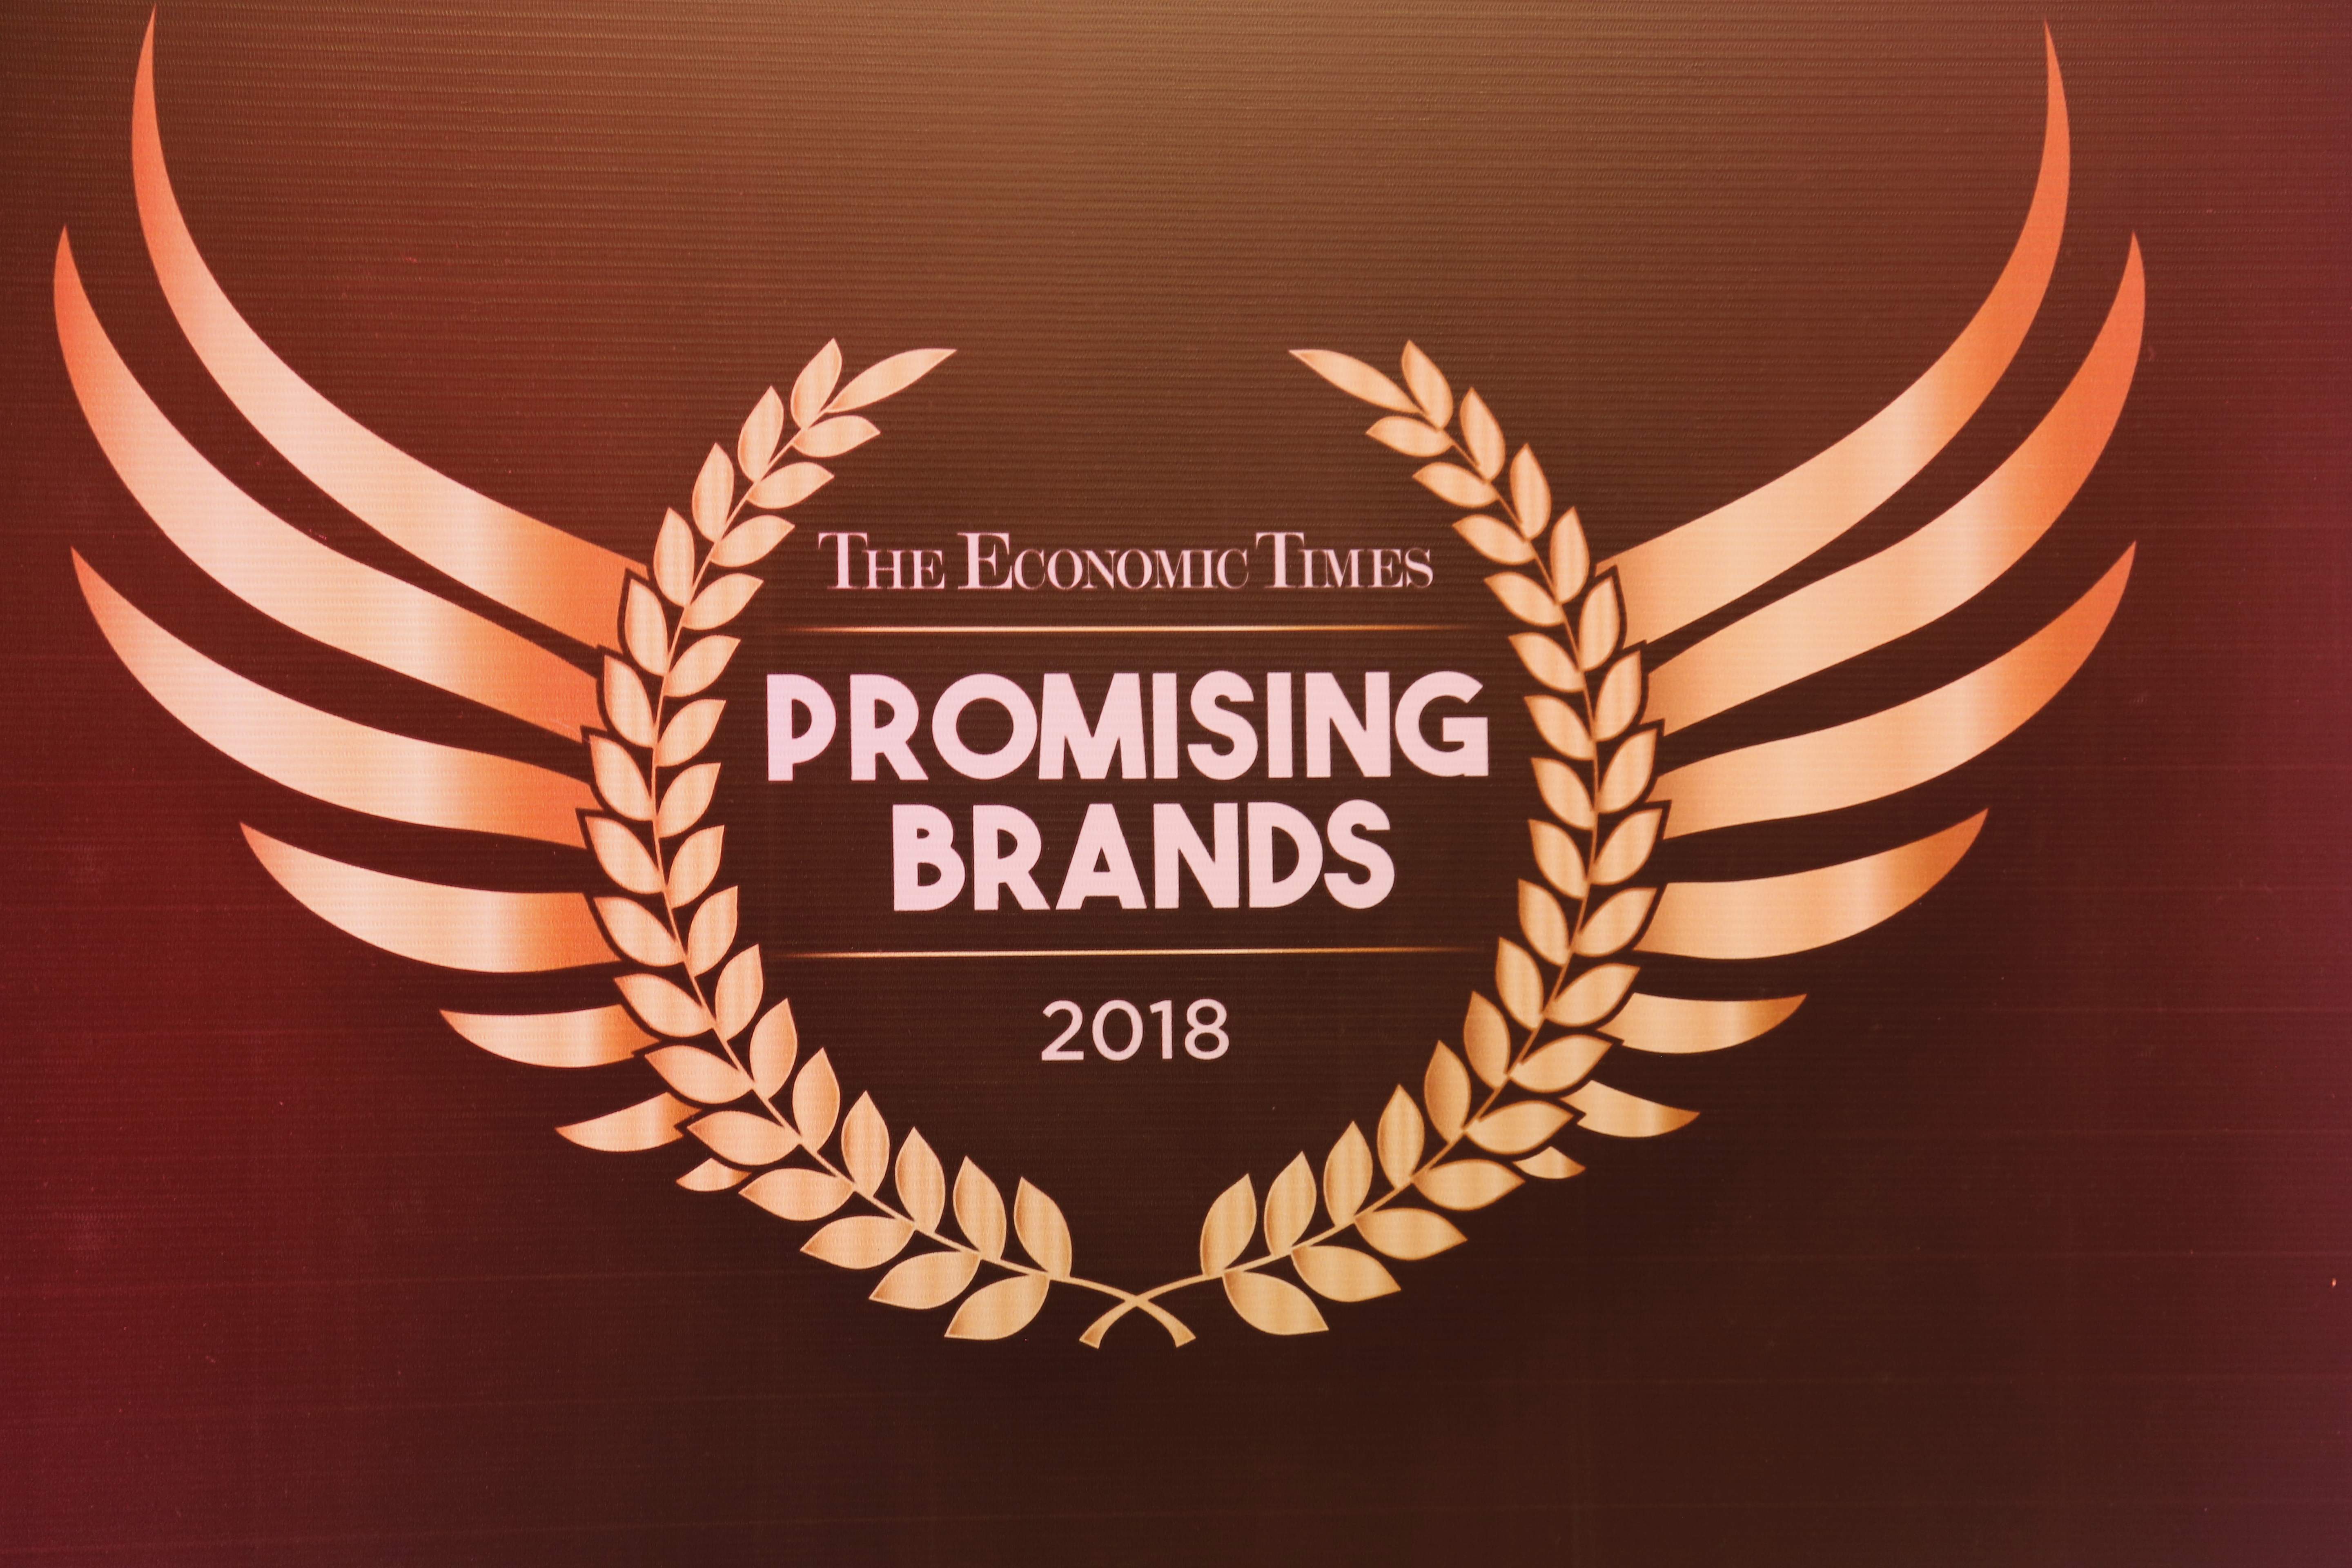 Apis India named The Promising Brand of the Year – 2018 by The Economic Times